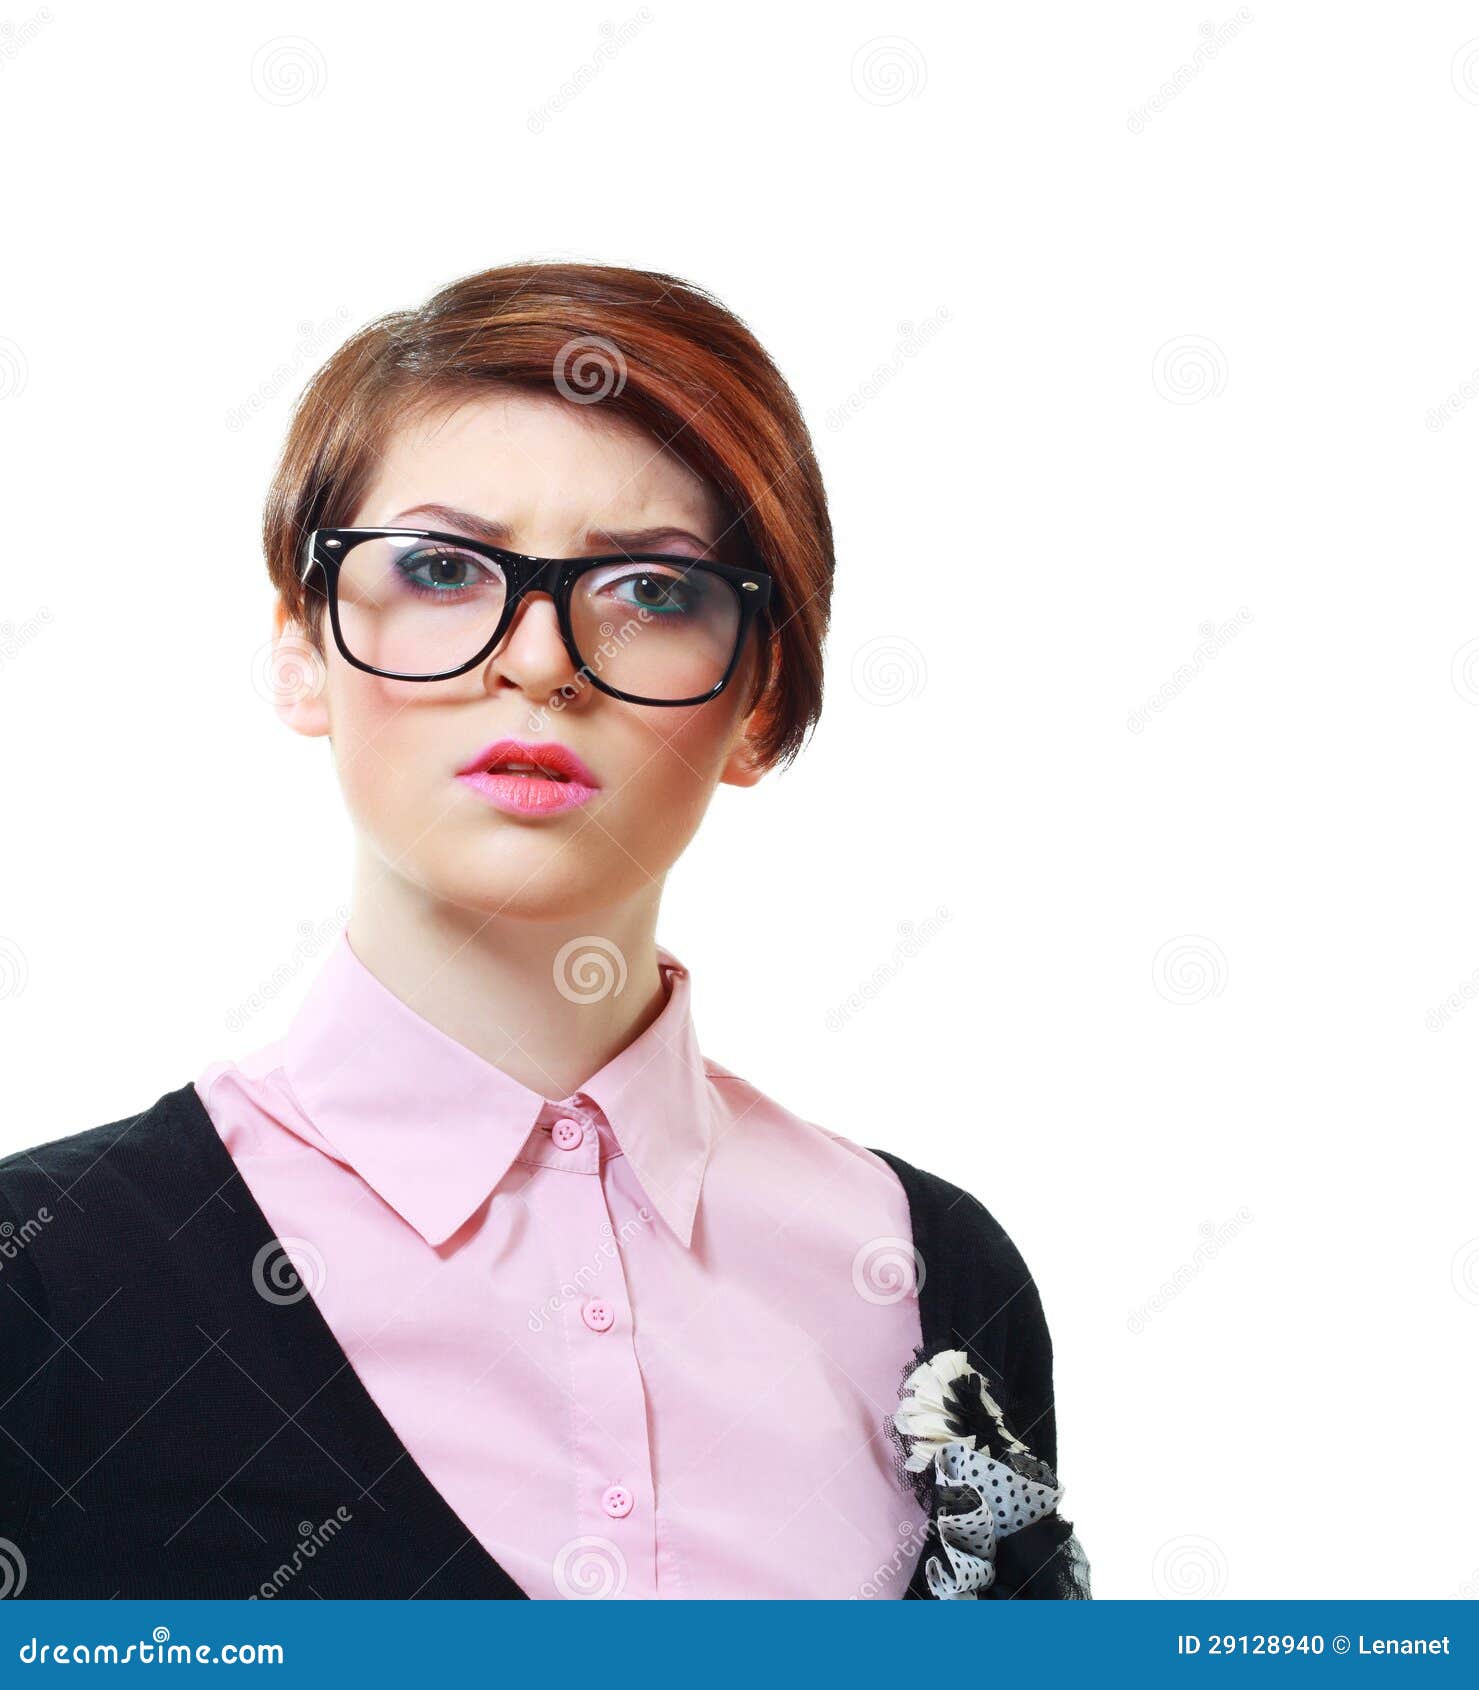 Concerned Young Woman Stock Photo - Image: 29128940